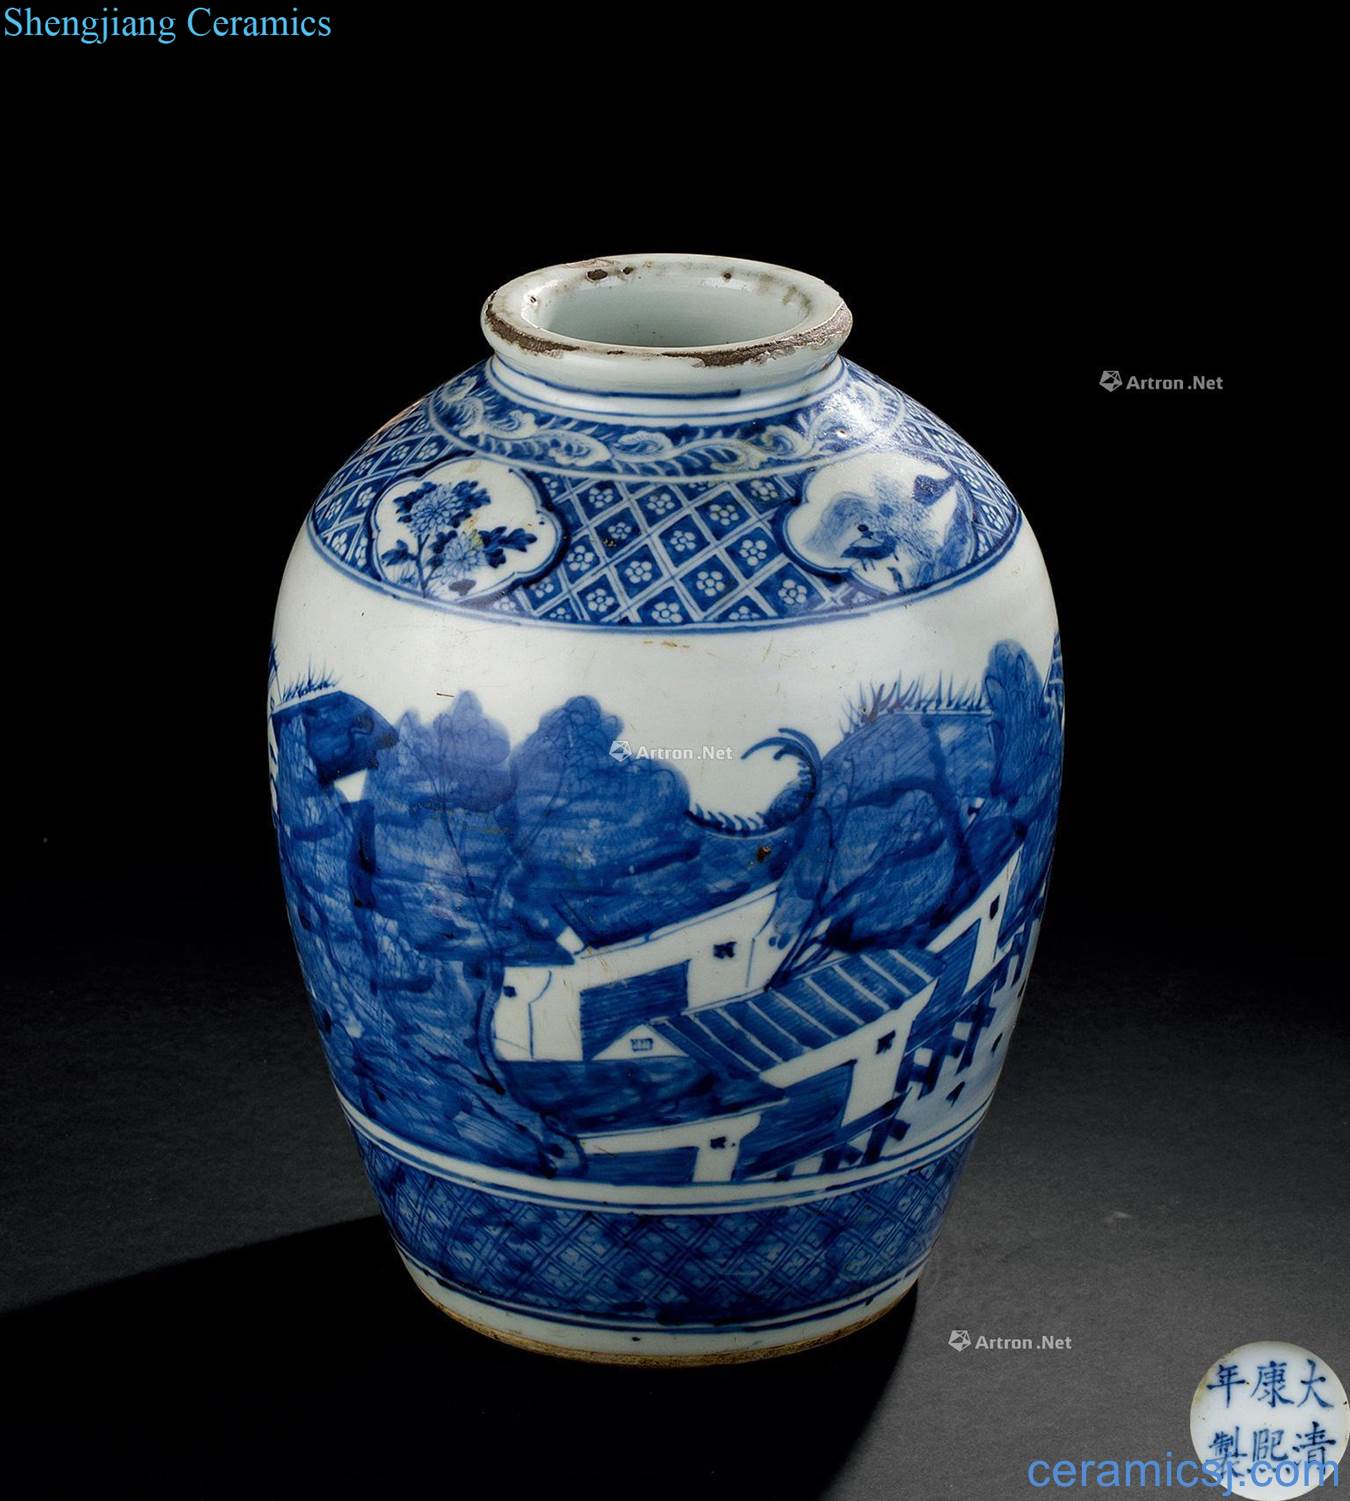 Blue and white landscape pattern in the qing dynasty (1644-1911)